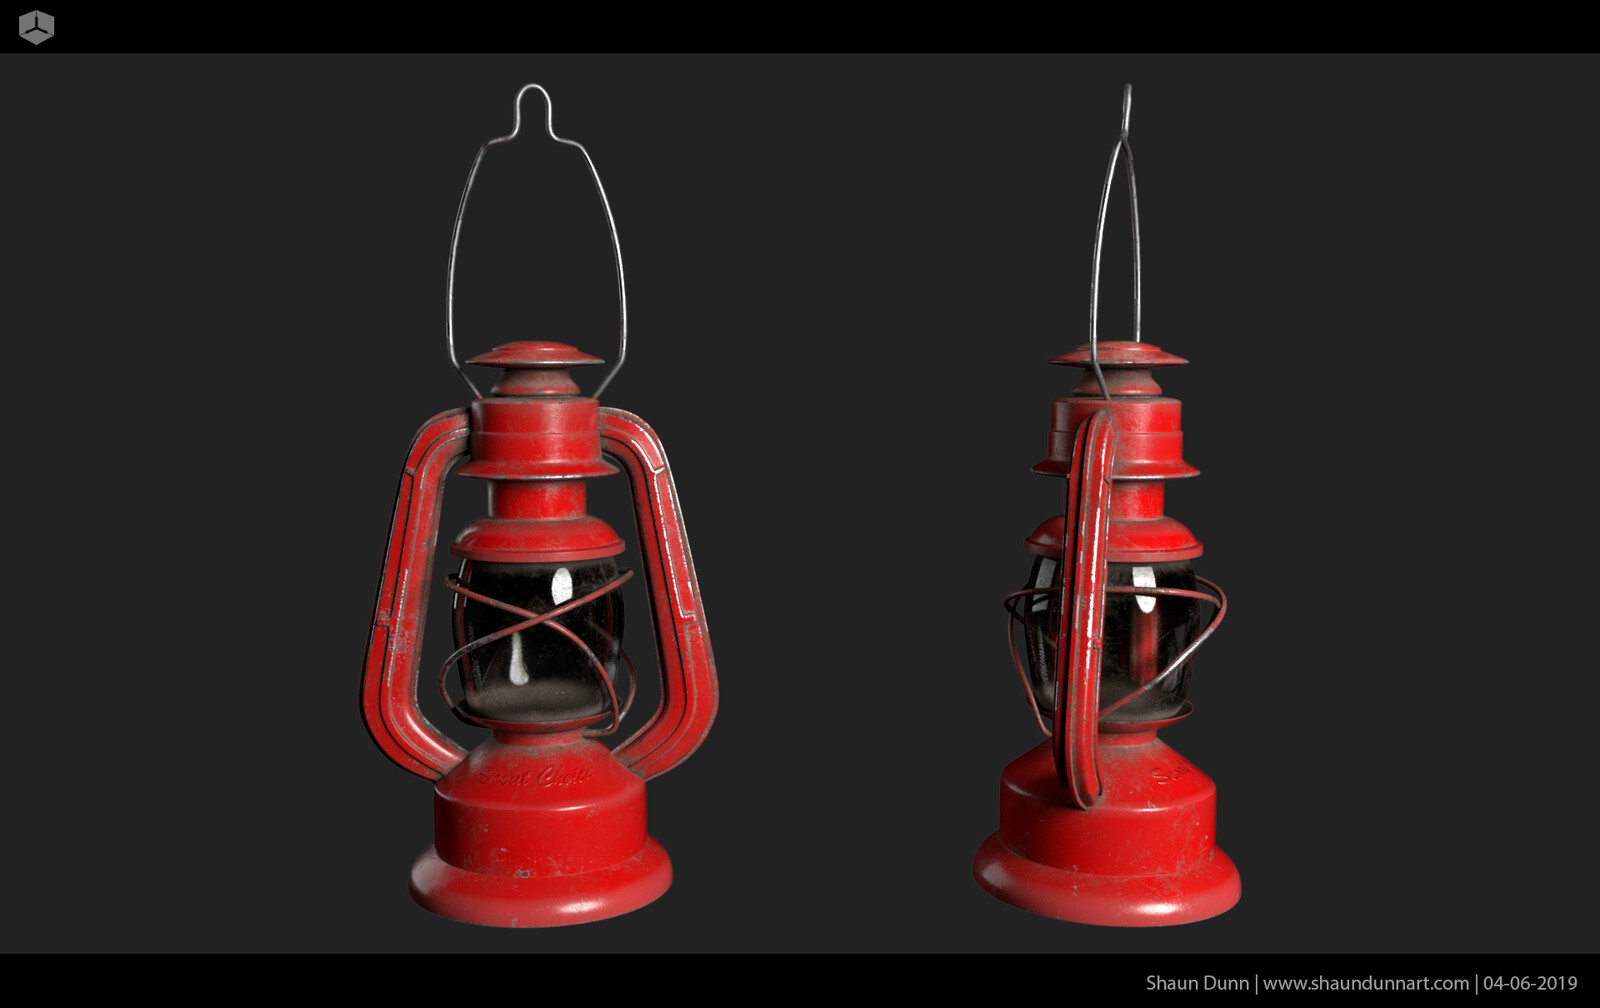 The lantern was a fun model to texture.